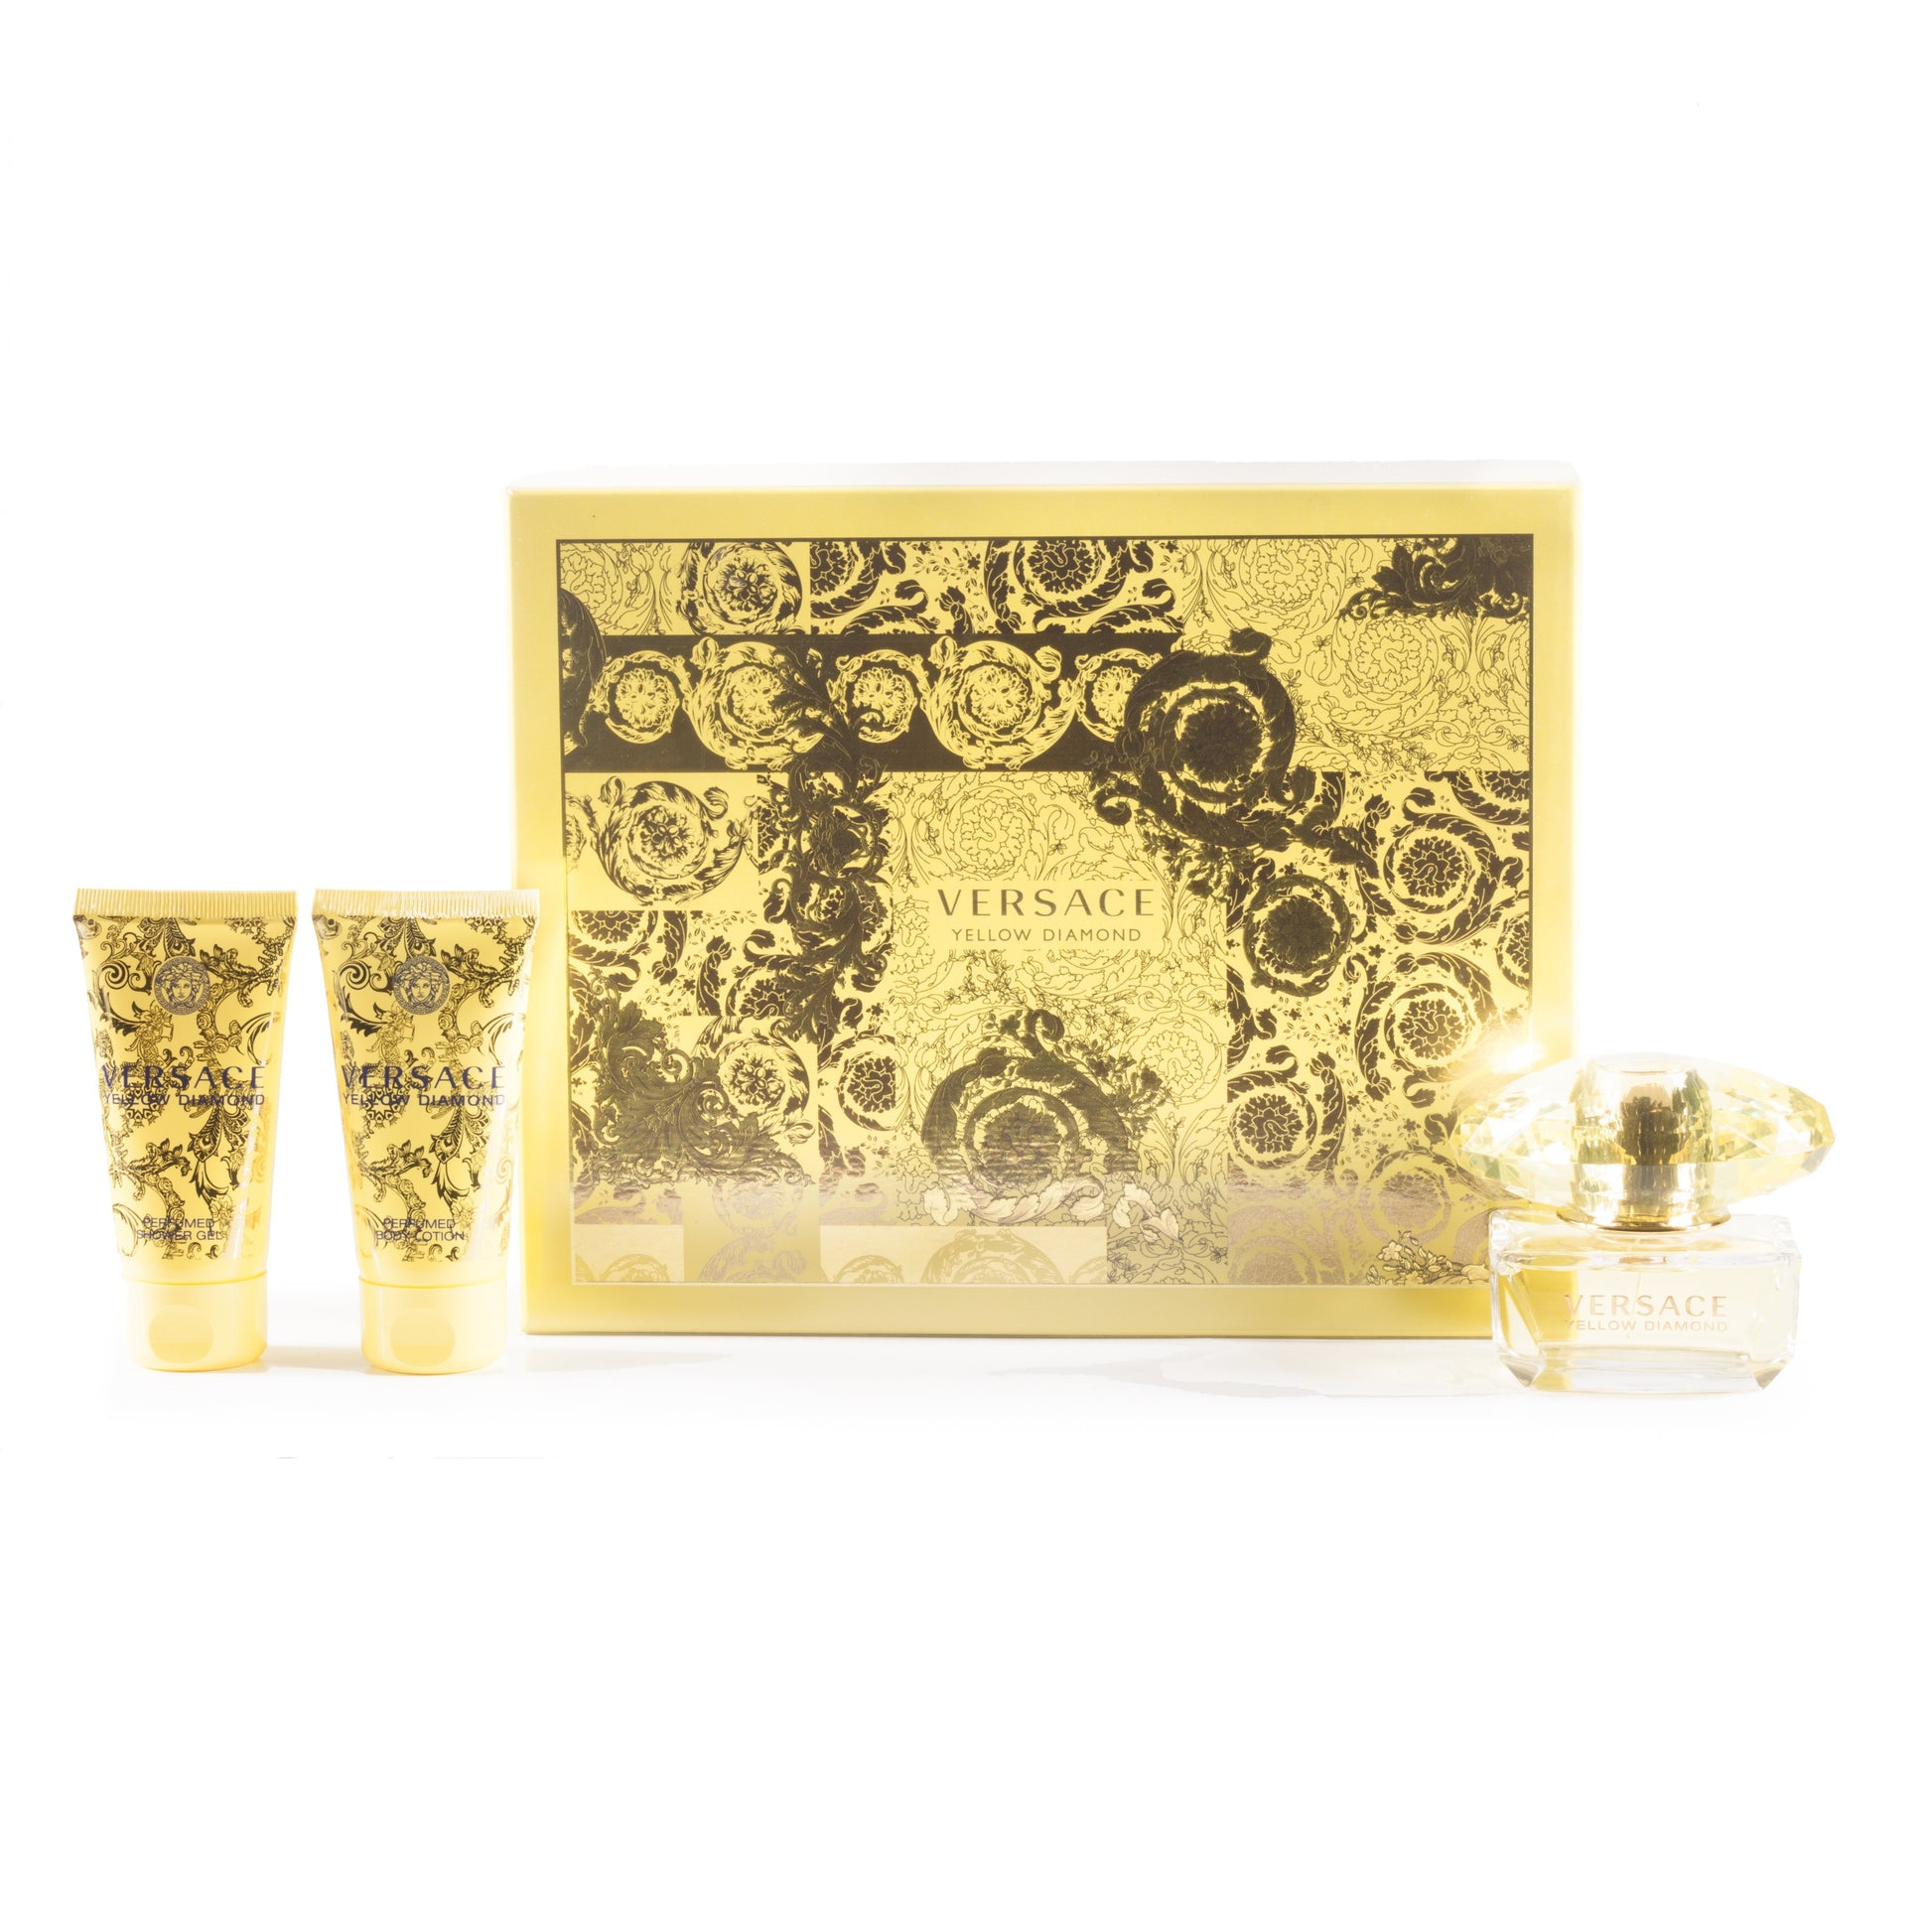 Yellow Diamond Gift Set Eau de Toilette, Body Lotion and Shower Gel for Women by Versace, Product image 1